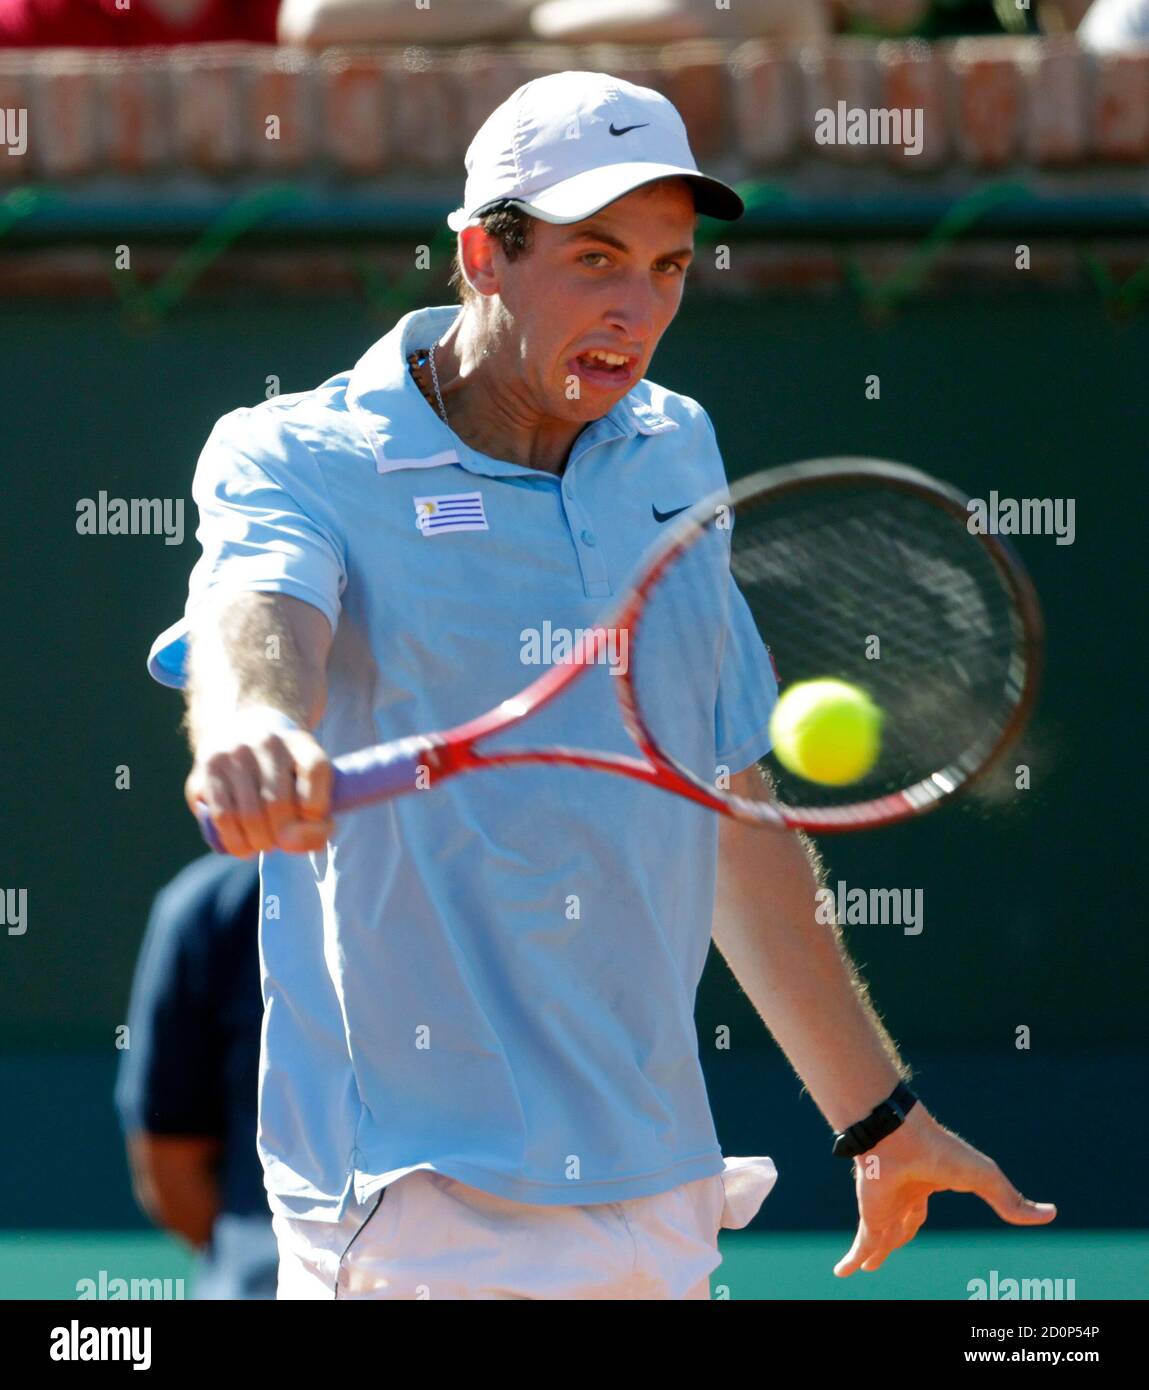 Uruguay's Martin Cuevas hits a backhand against Peru's Duilio Beretta  during their Davis Cup tennis match in Montevideo February 10, 2012.  REUTERS/Andres Stapff (URUGUAY - Tags: SPORT TENNIS Stock Photo - Alamy